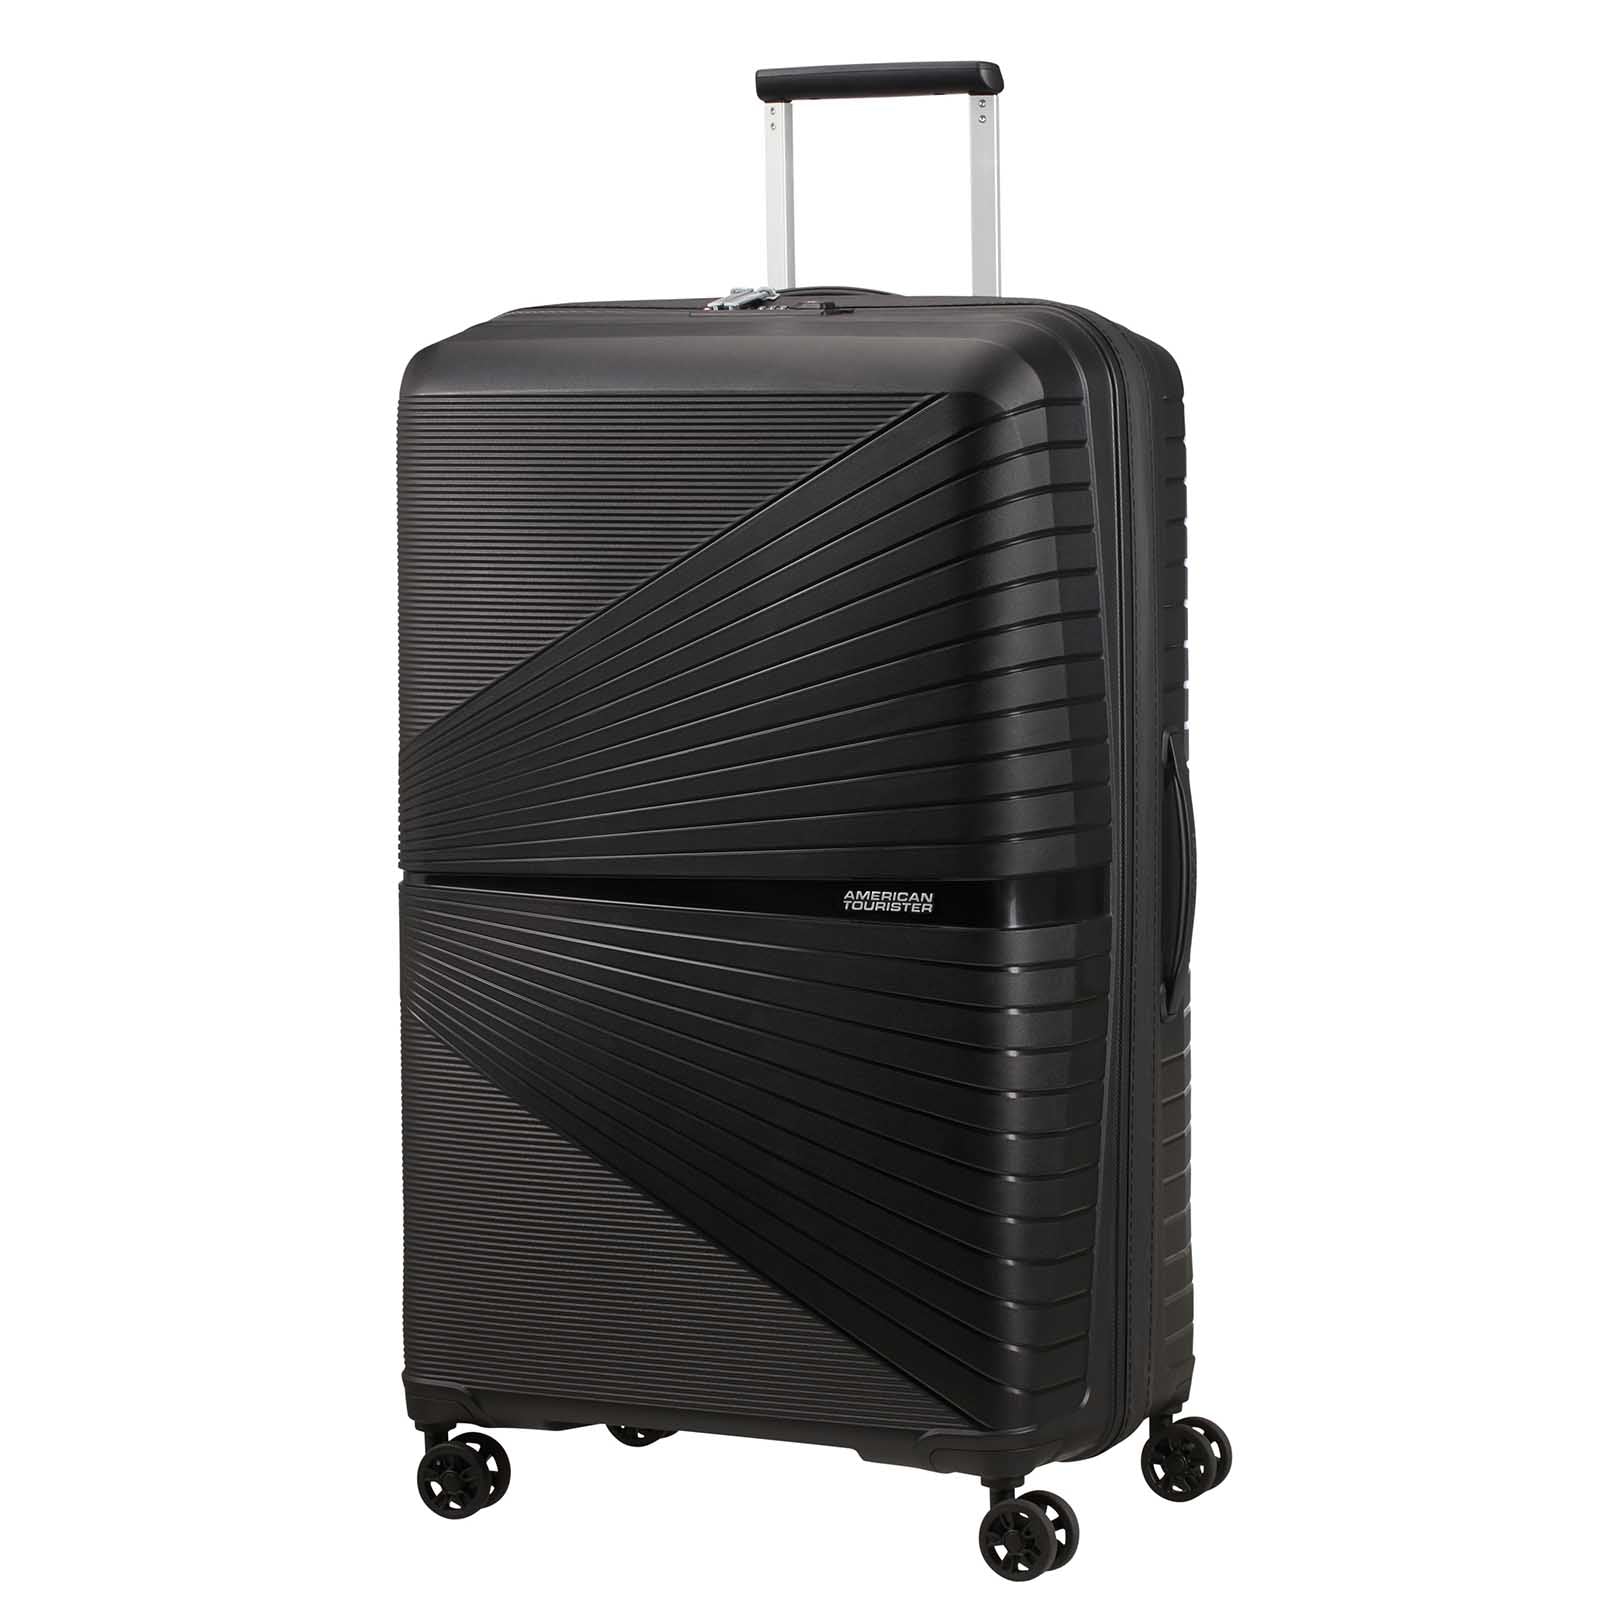 American-Tourister-Airconic-77cm-Suitcase-Onyx-Black-Front-Angle